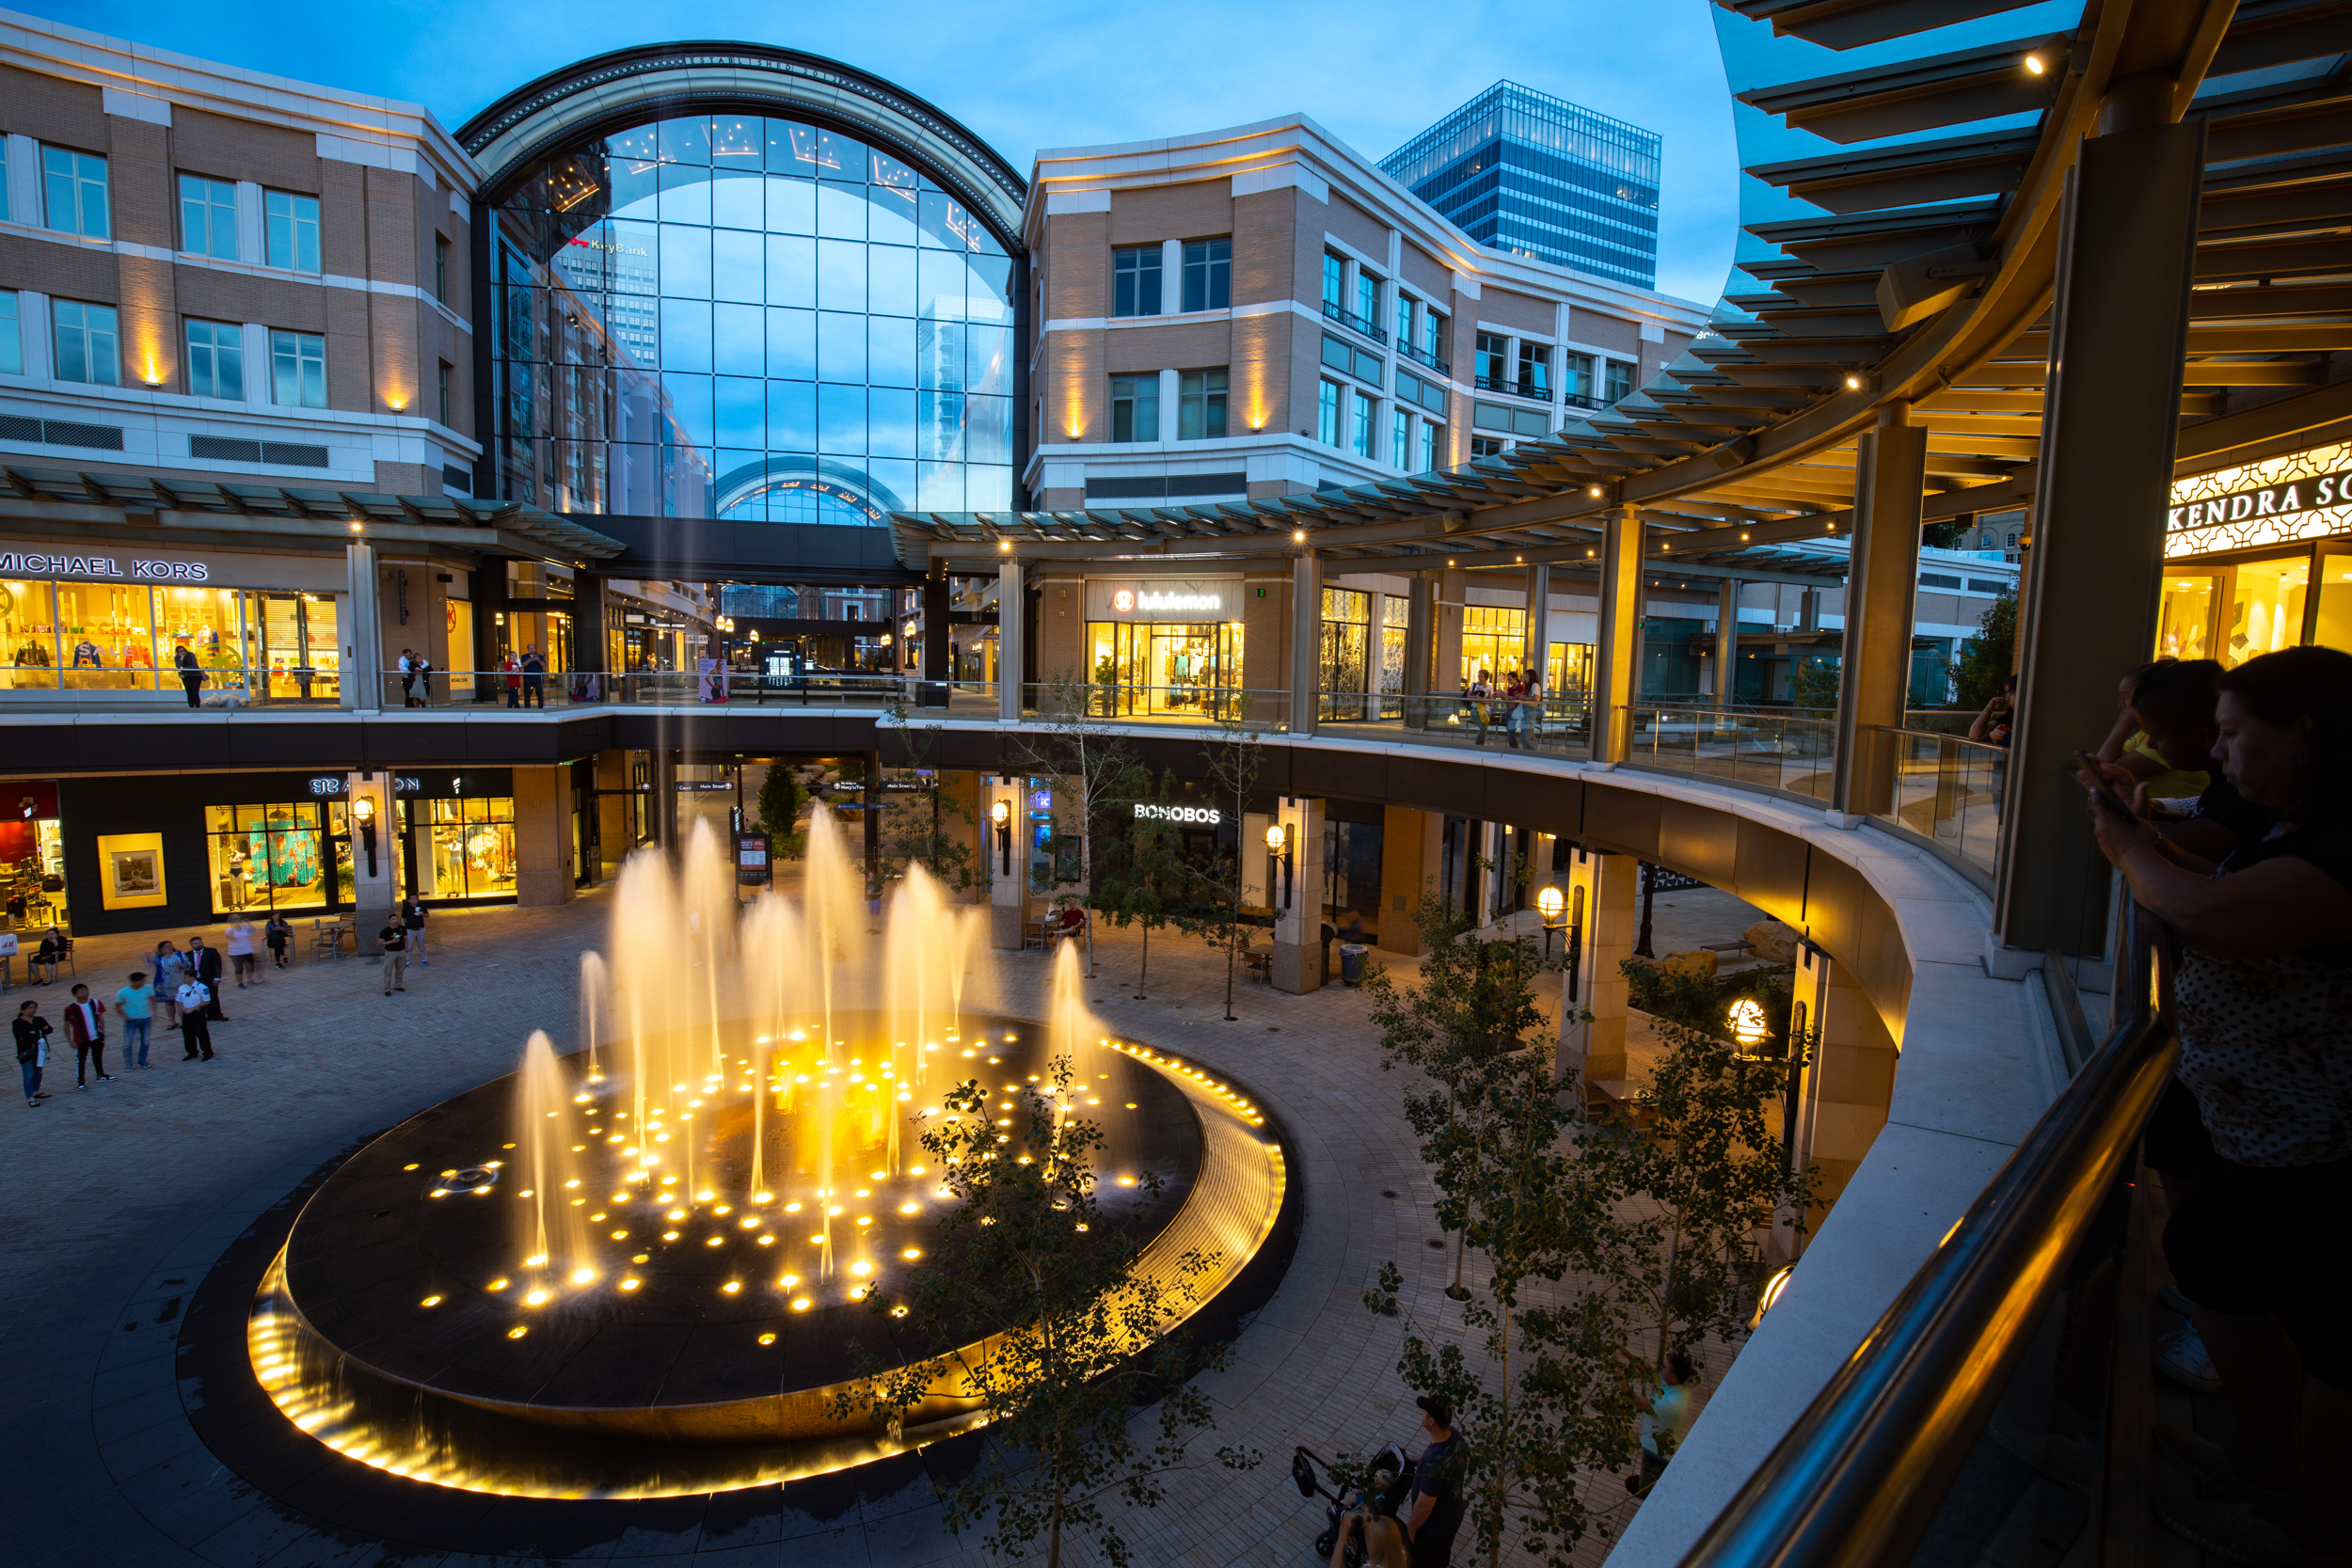 City Creek Center - All You Need to Know BEFORE You Go (with Photos)